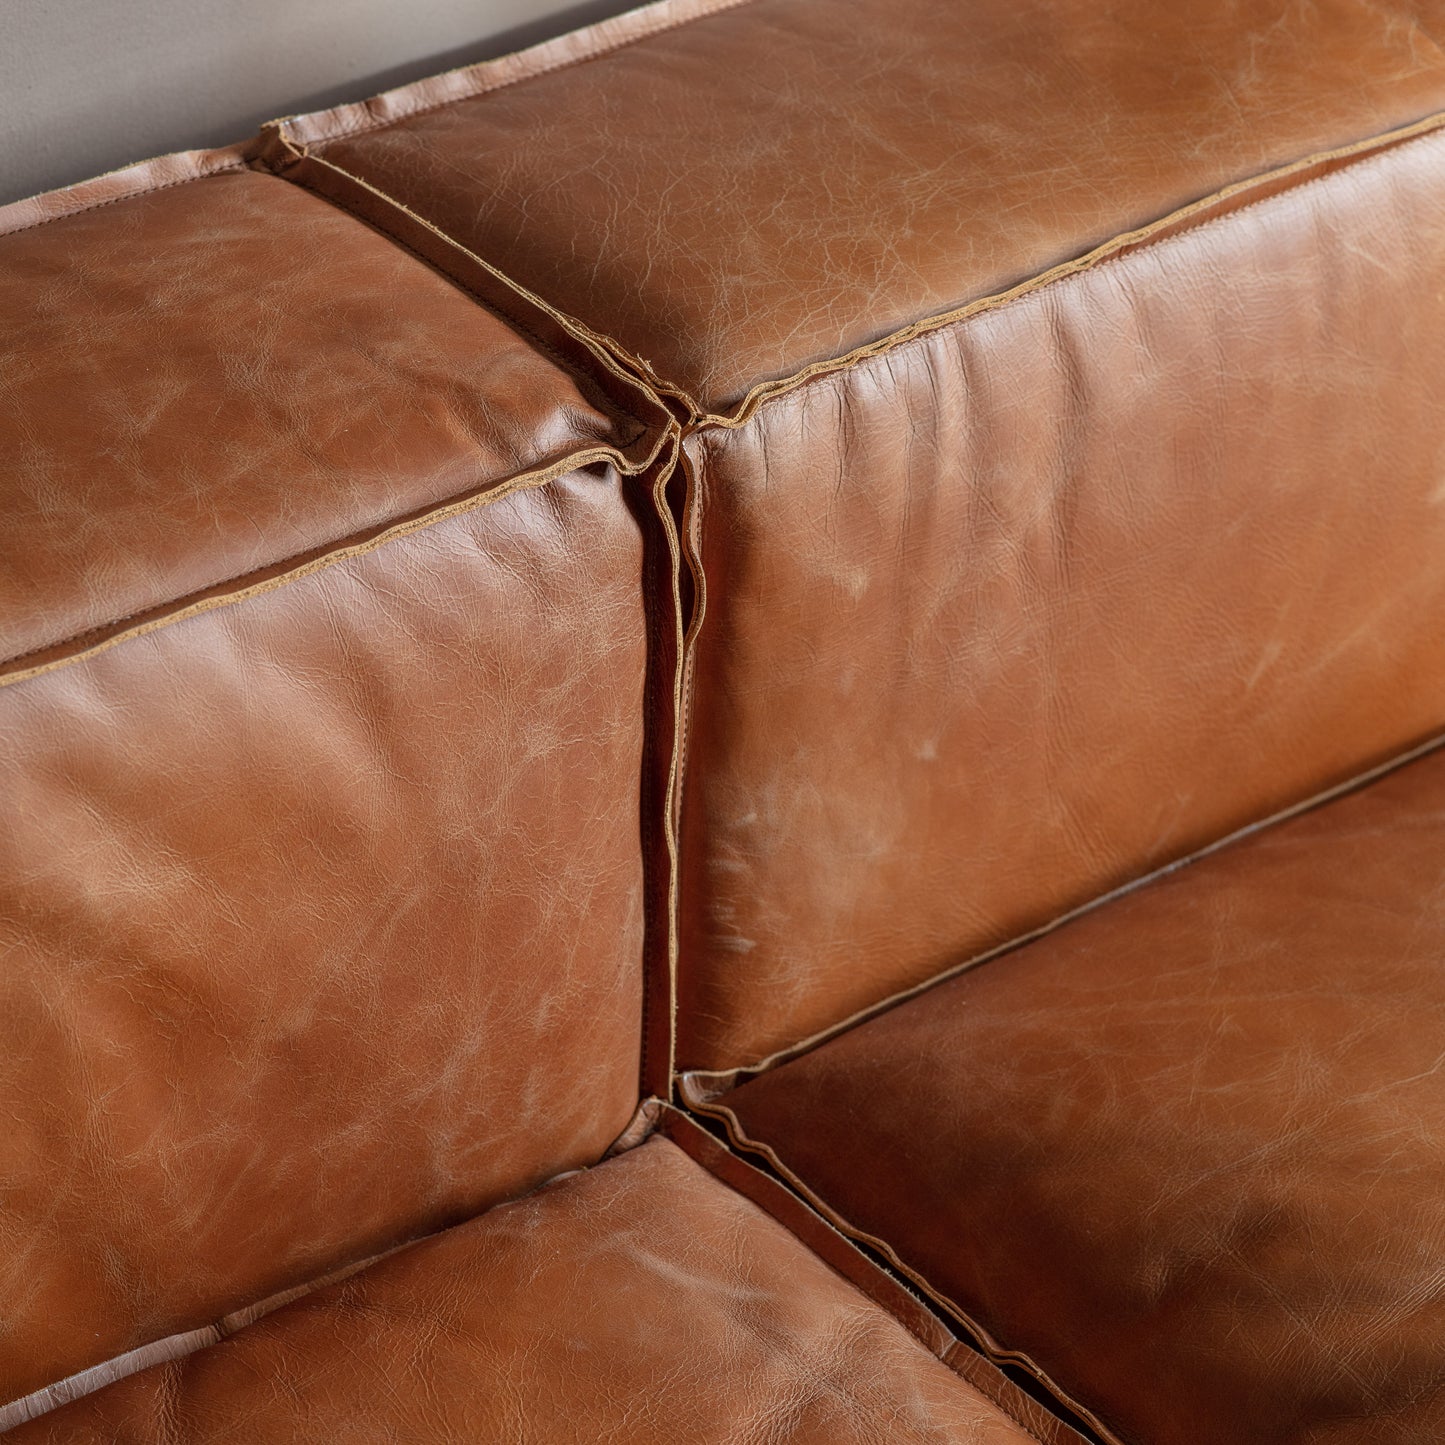 A close up of a Vintage Brown Leather couch from Kikiathome.co.uk, perfect for interior decor.